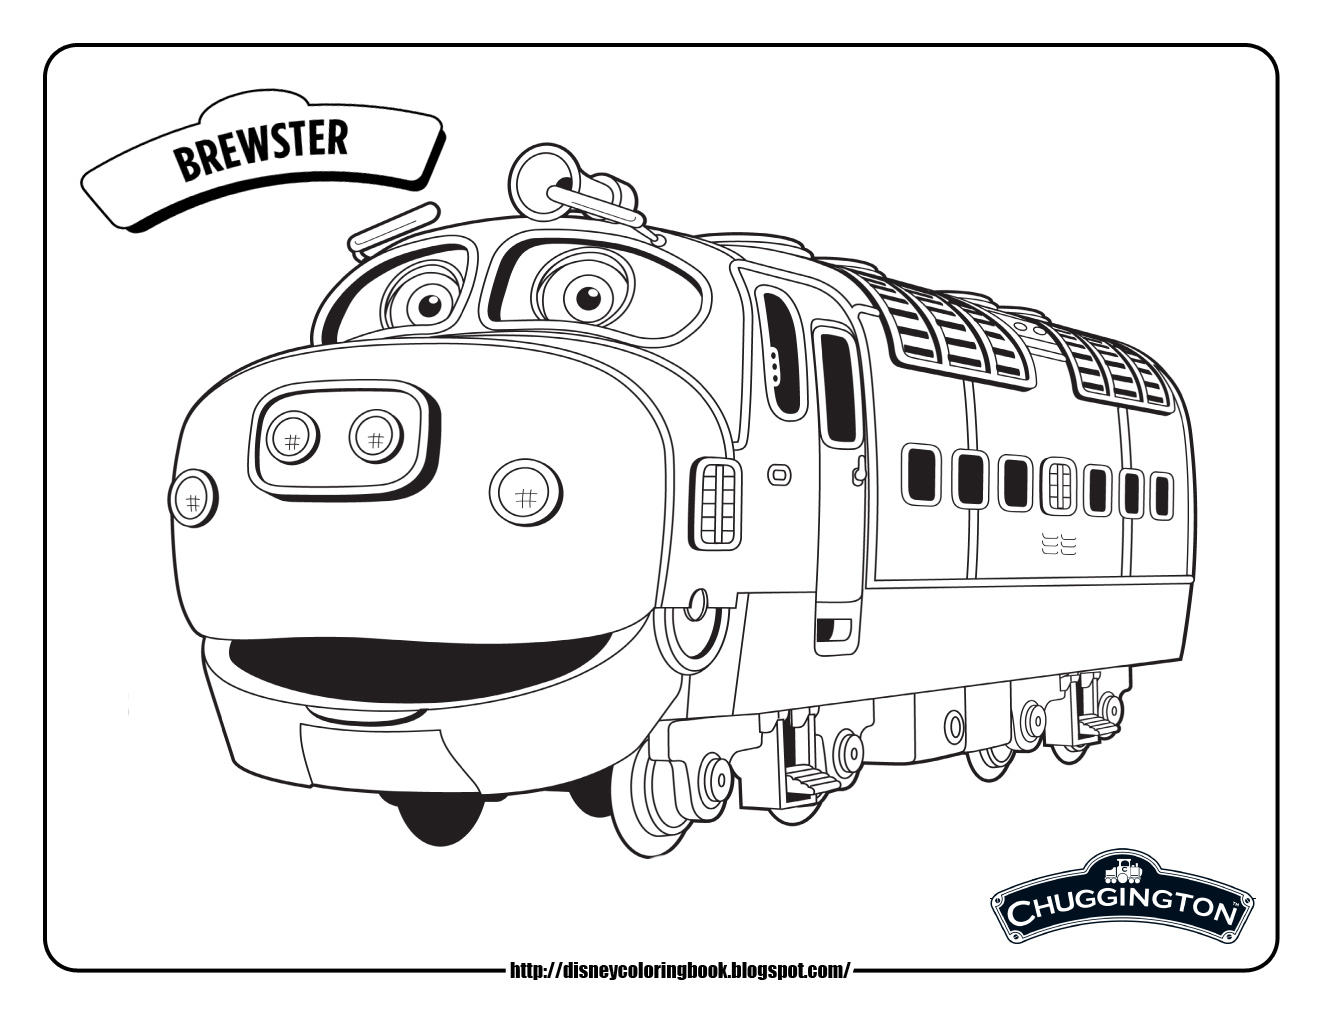 Download Disney Coloring Pages and Sheets for Kids: Chuggington 1: Free Disney Coloring Sheets